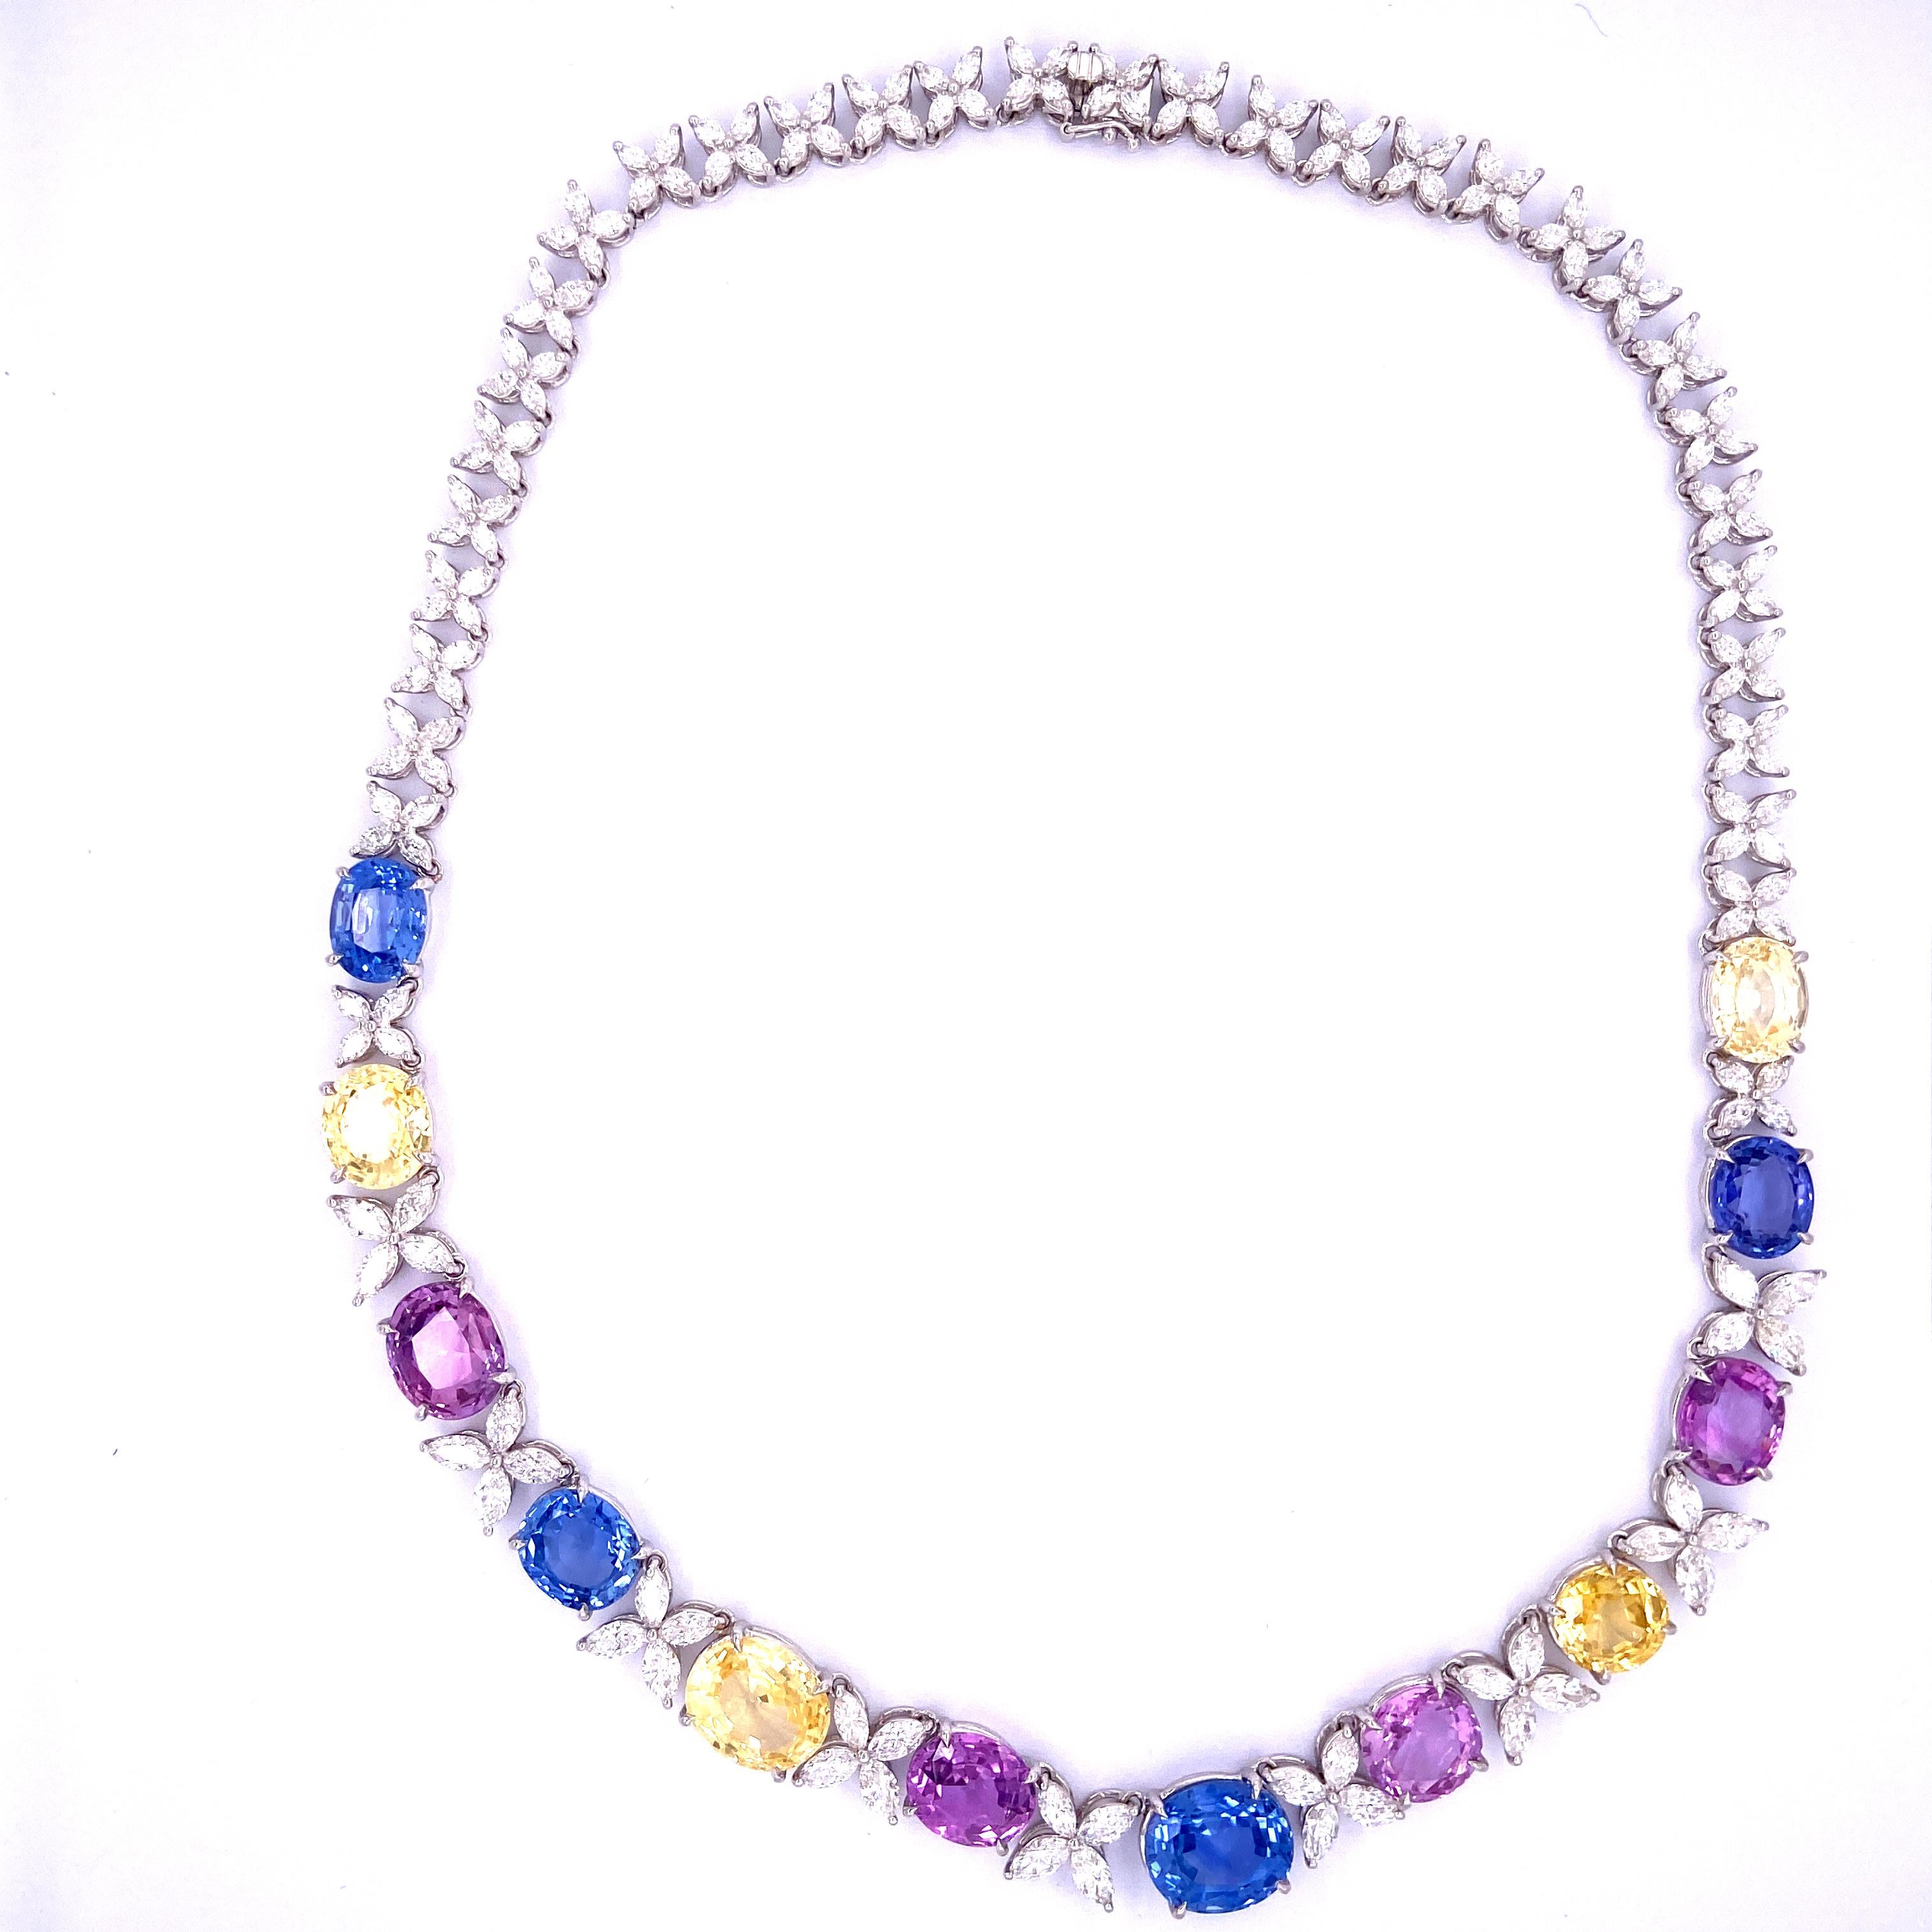 Contemporary 71.49 Carat GIA Certified Unheated Sapphire and White Diamond Gold Necklace For Sale